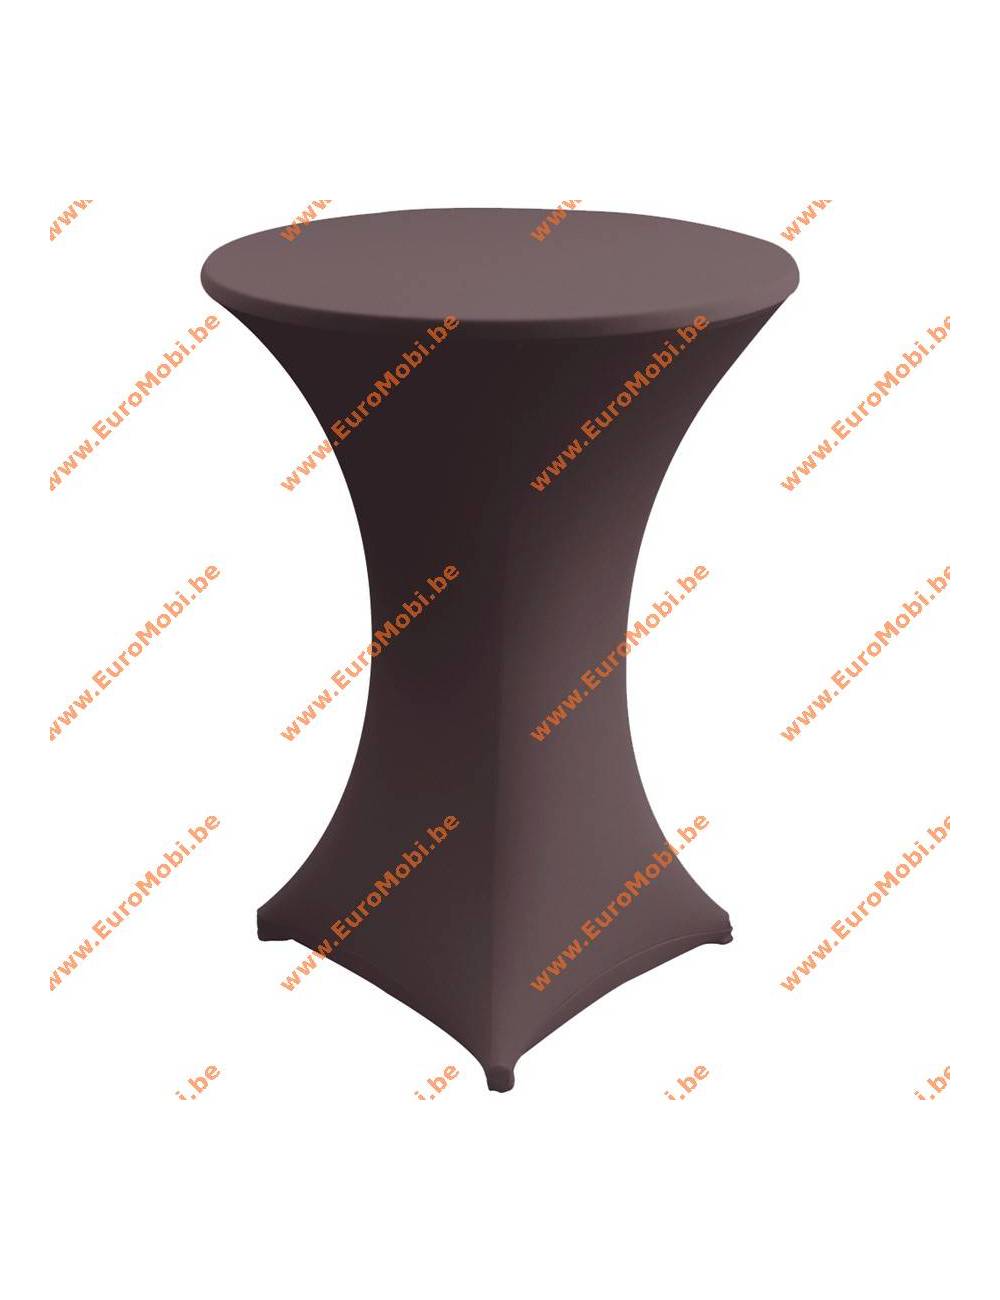 Cover and top stretch for standing table round brown dark